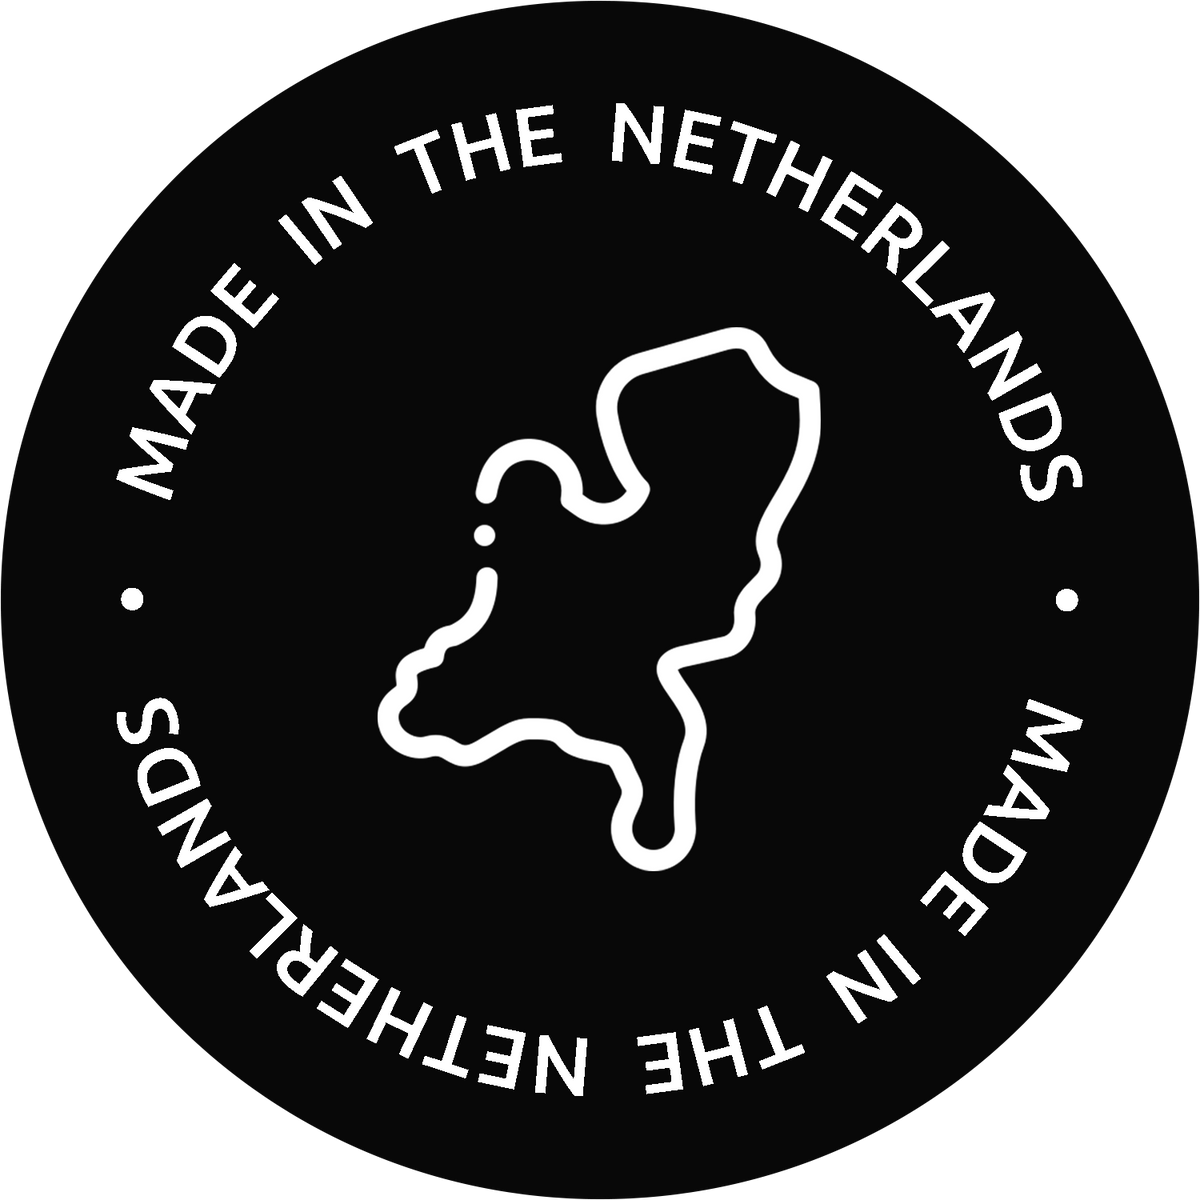 perfume-made-in-the-netherlands.png__PID:7124277c-b2e7-4d36-b49b-7d3c15675105